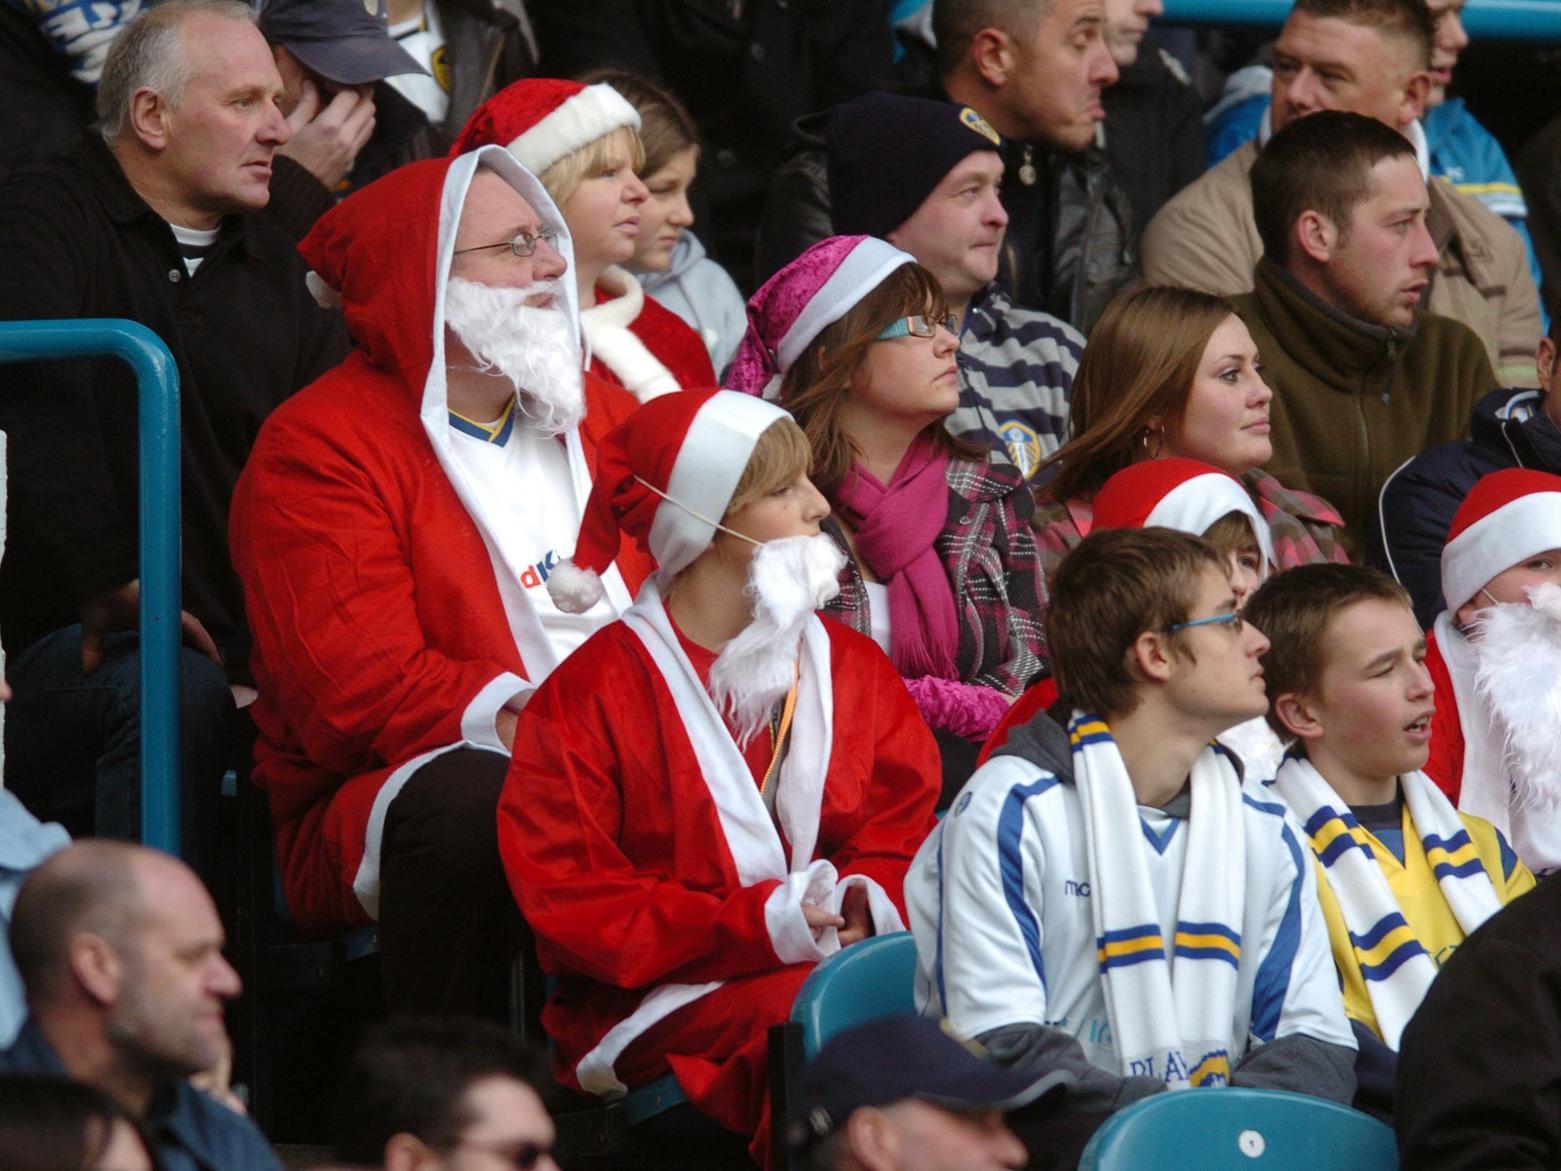 The Elland Road faithful will soon be decked out in this headgear of choice when attending those cold winter games in the run up to Christmas.